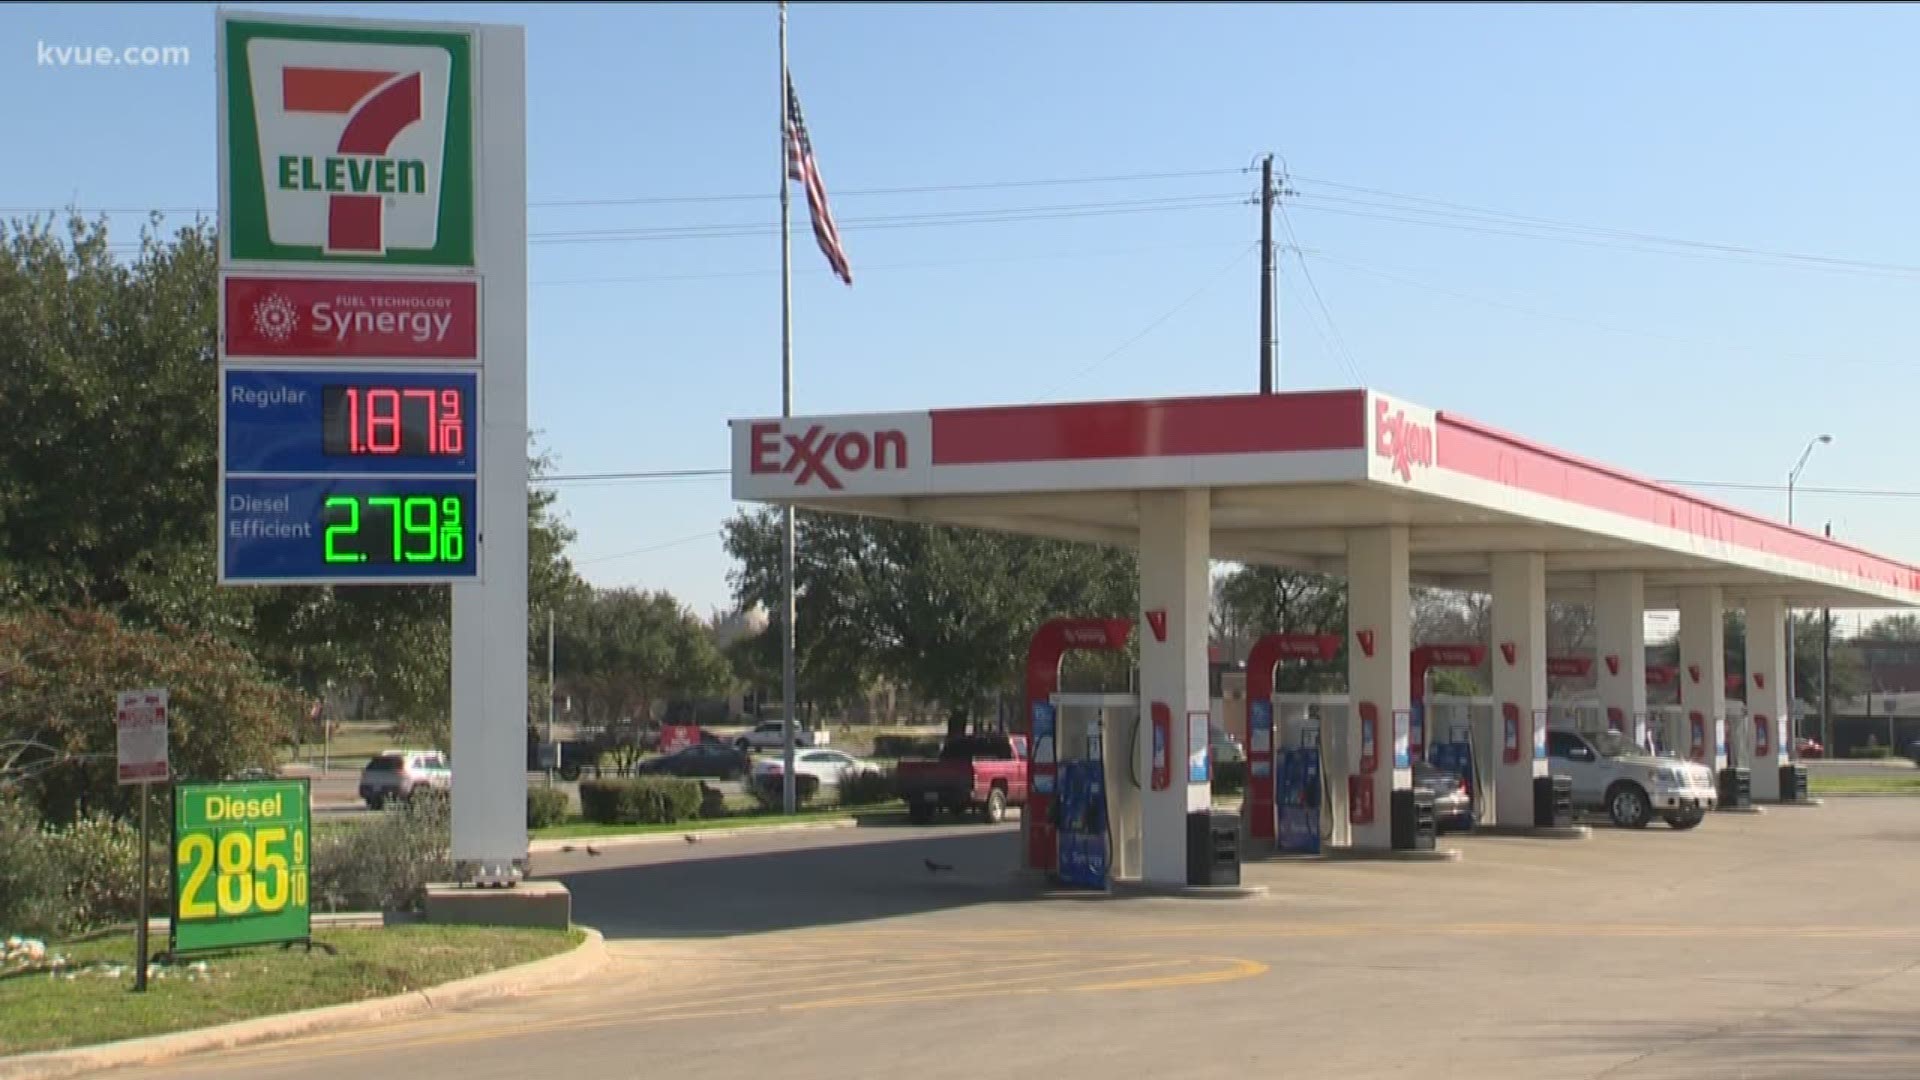 A man is in custody after a reported robbery Sunday morning at an Austin 7-Eleven.